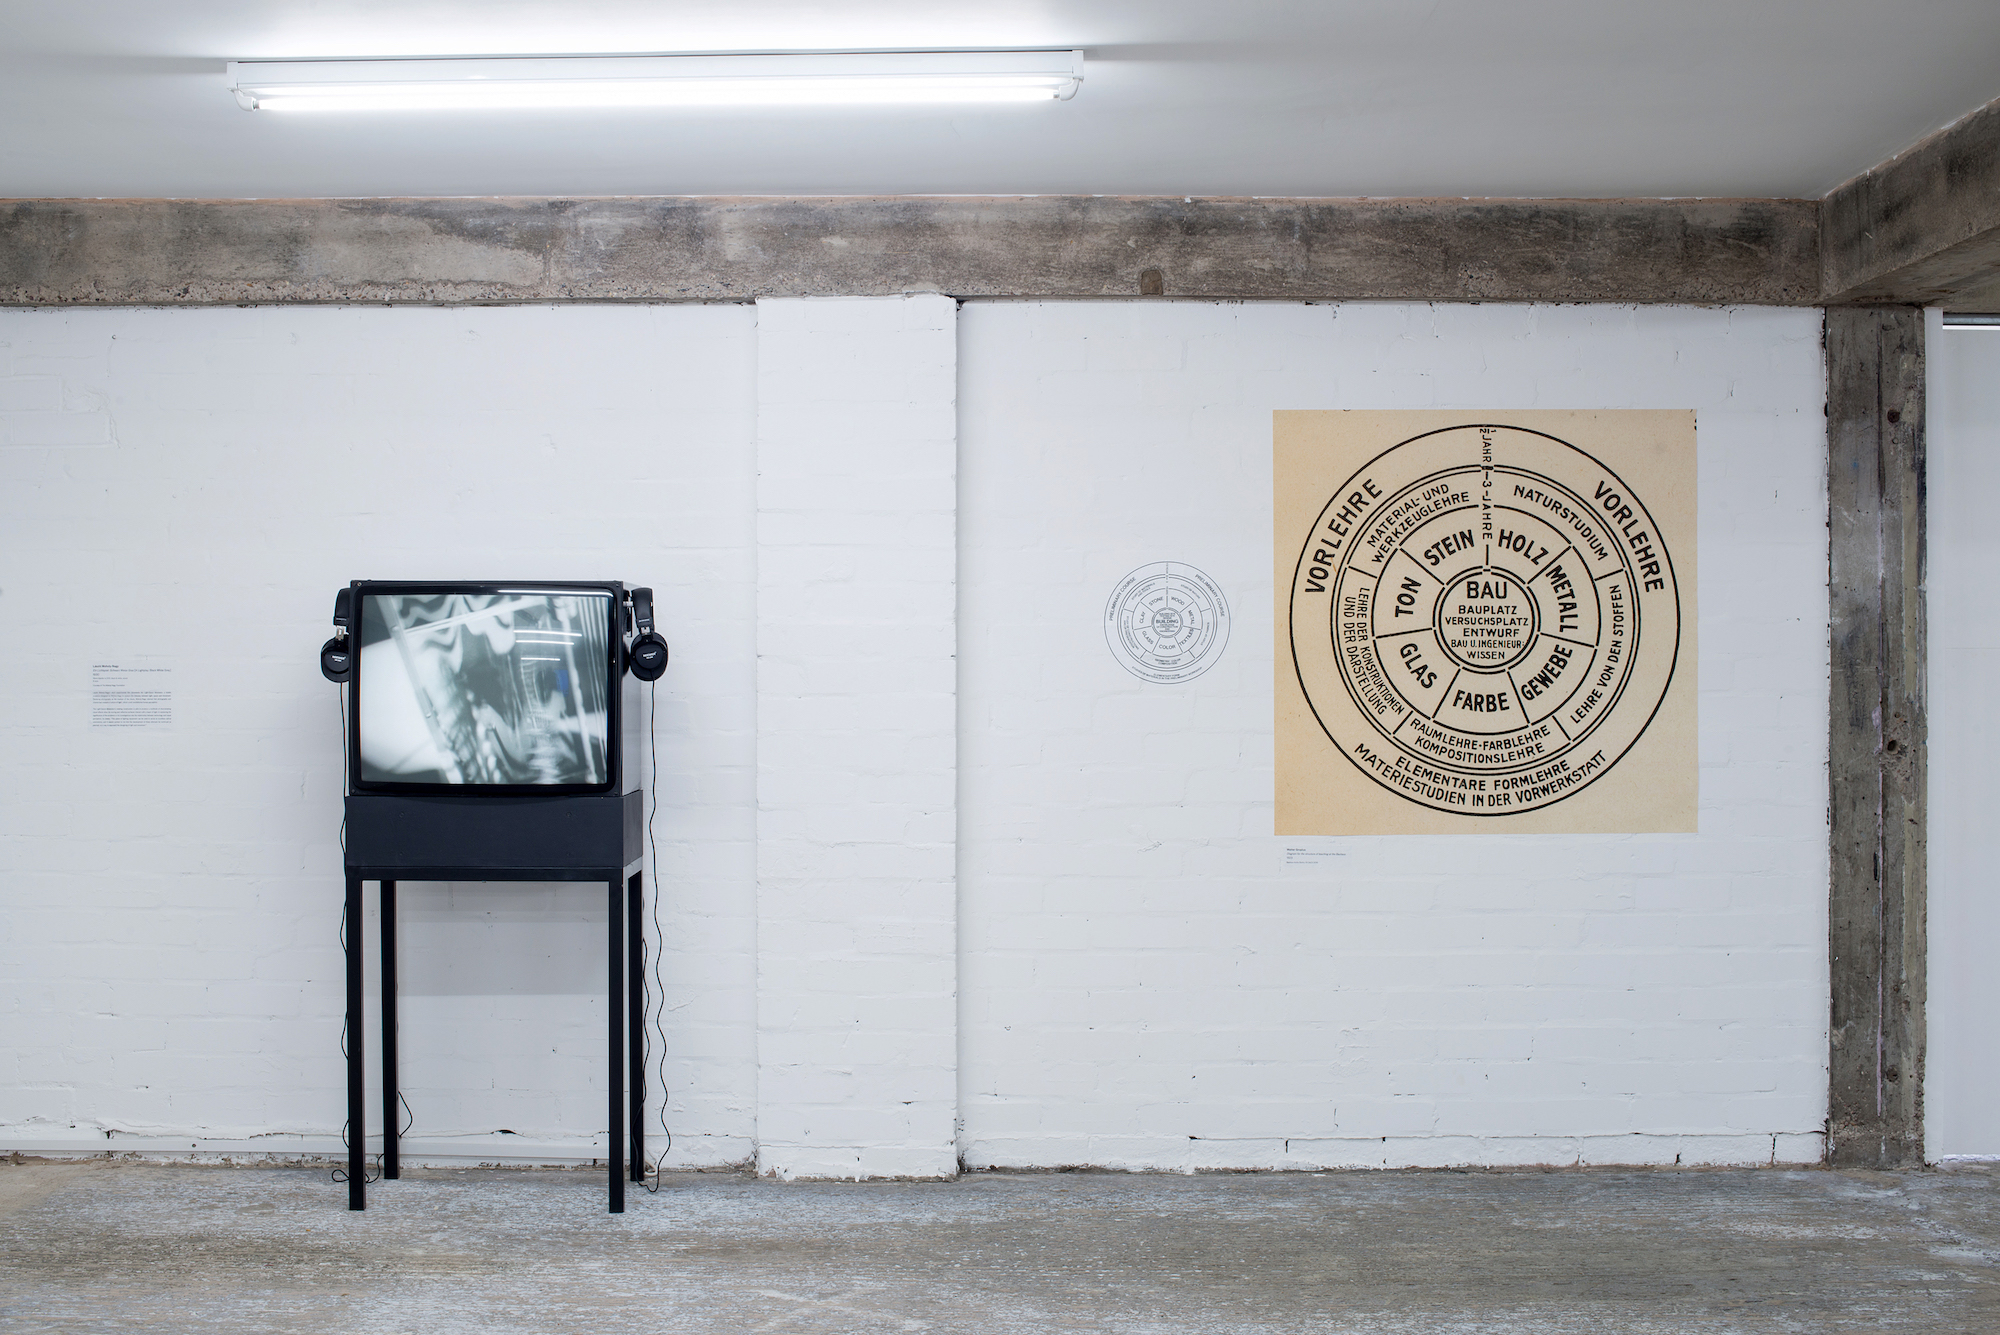 Two artworks in a gallery. On the left, a TV screen with headphones shows an artist's film. On the right, a spiral diagram in German.